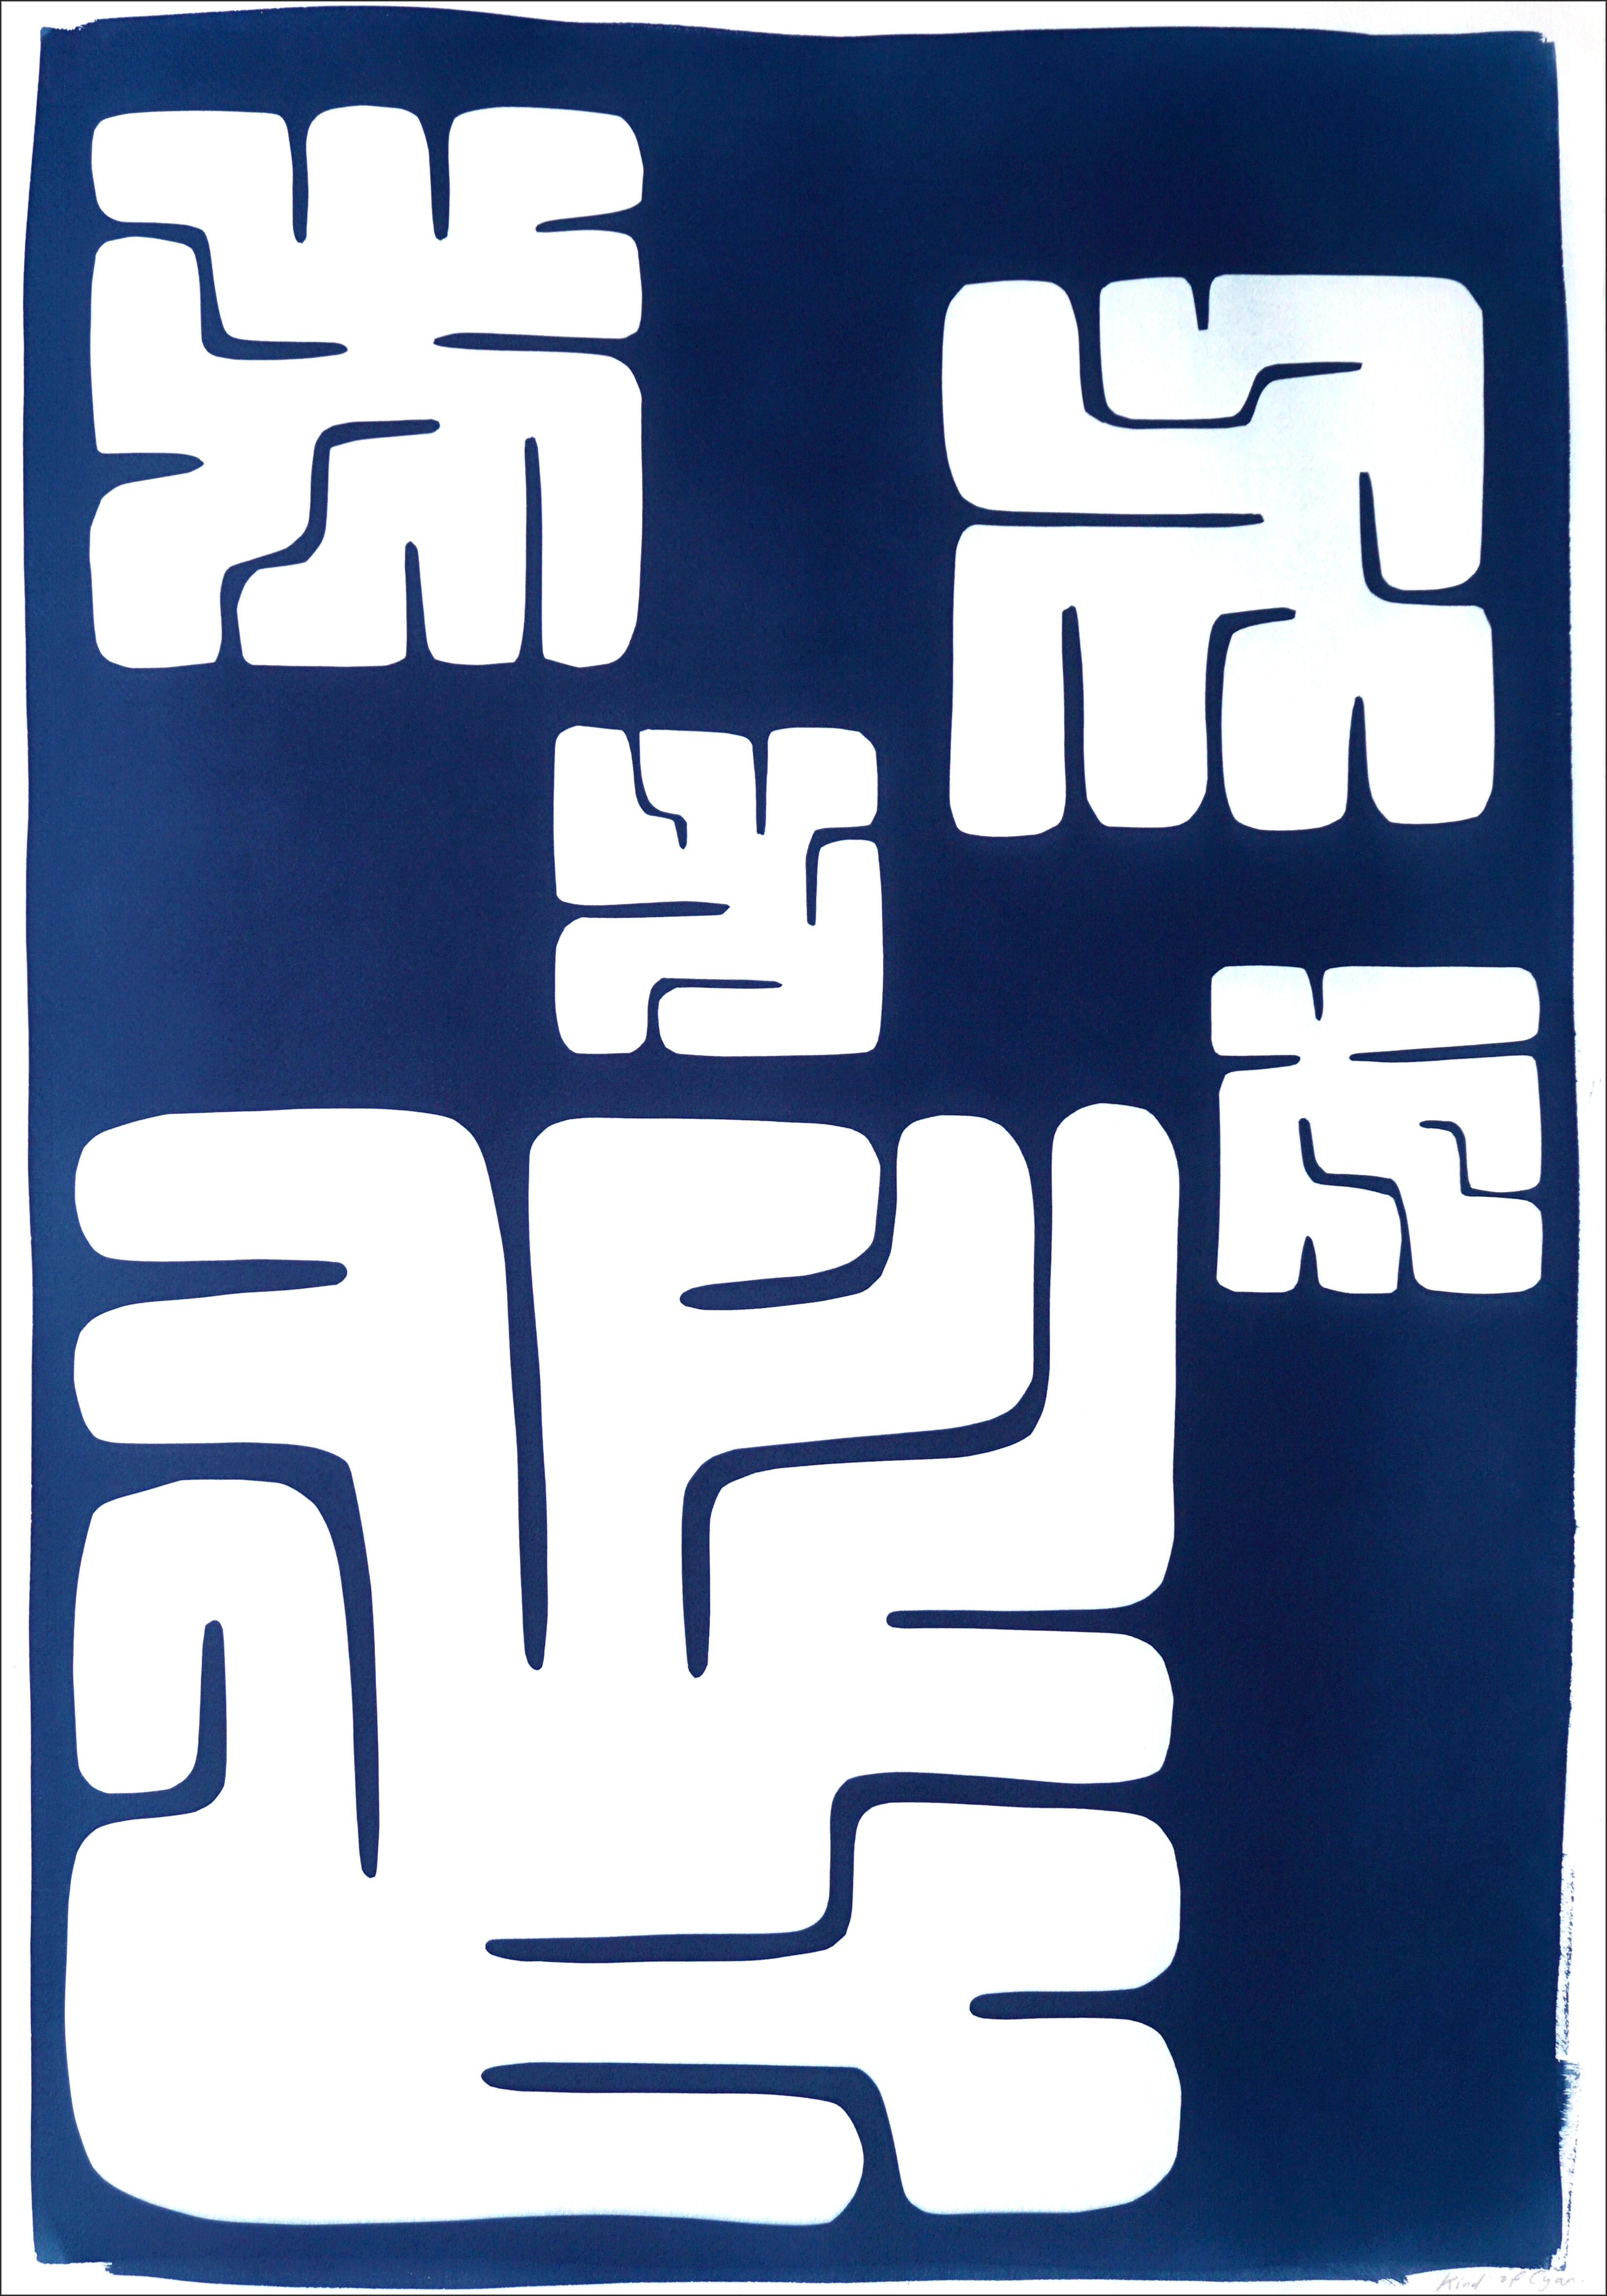 Kind of Cyan Abstract Print - Nazca Styles Unique Monotype on Paper in Deep Blue, Mayan Block Figures, 2021 